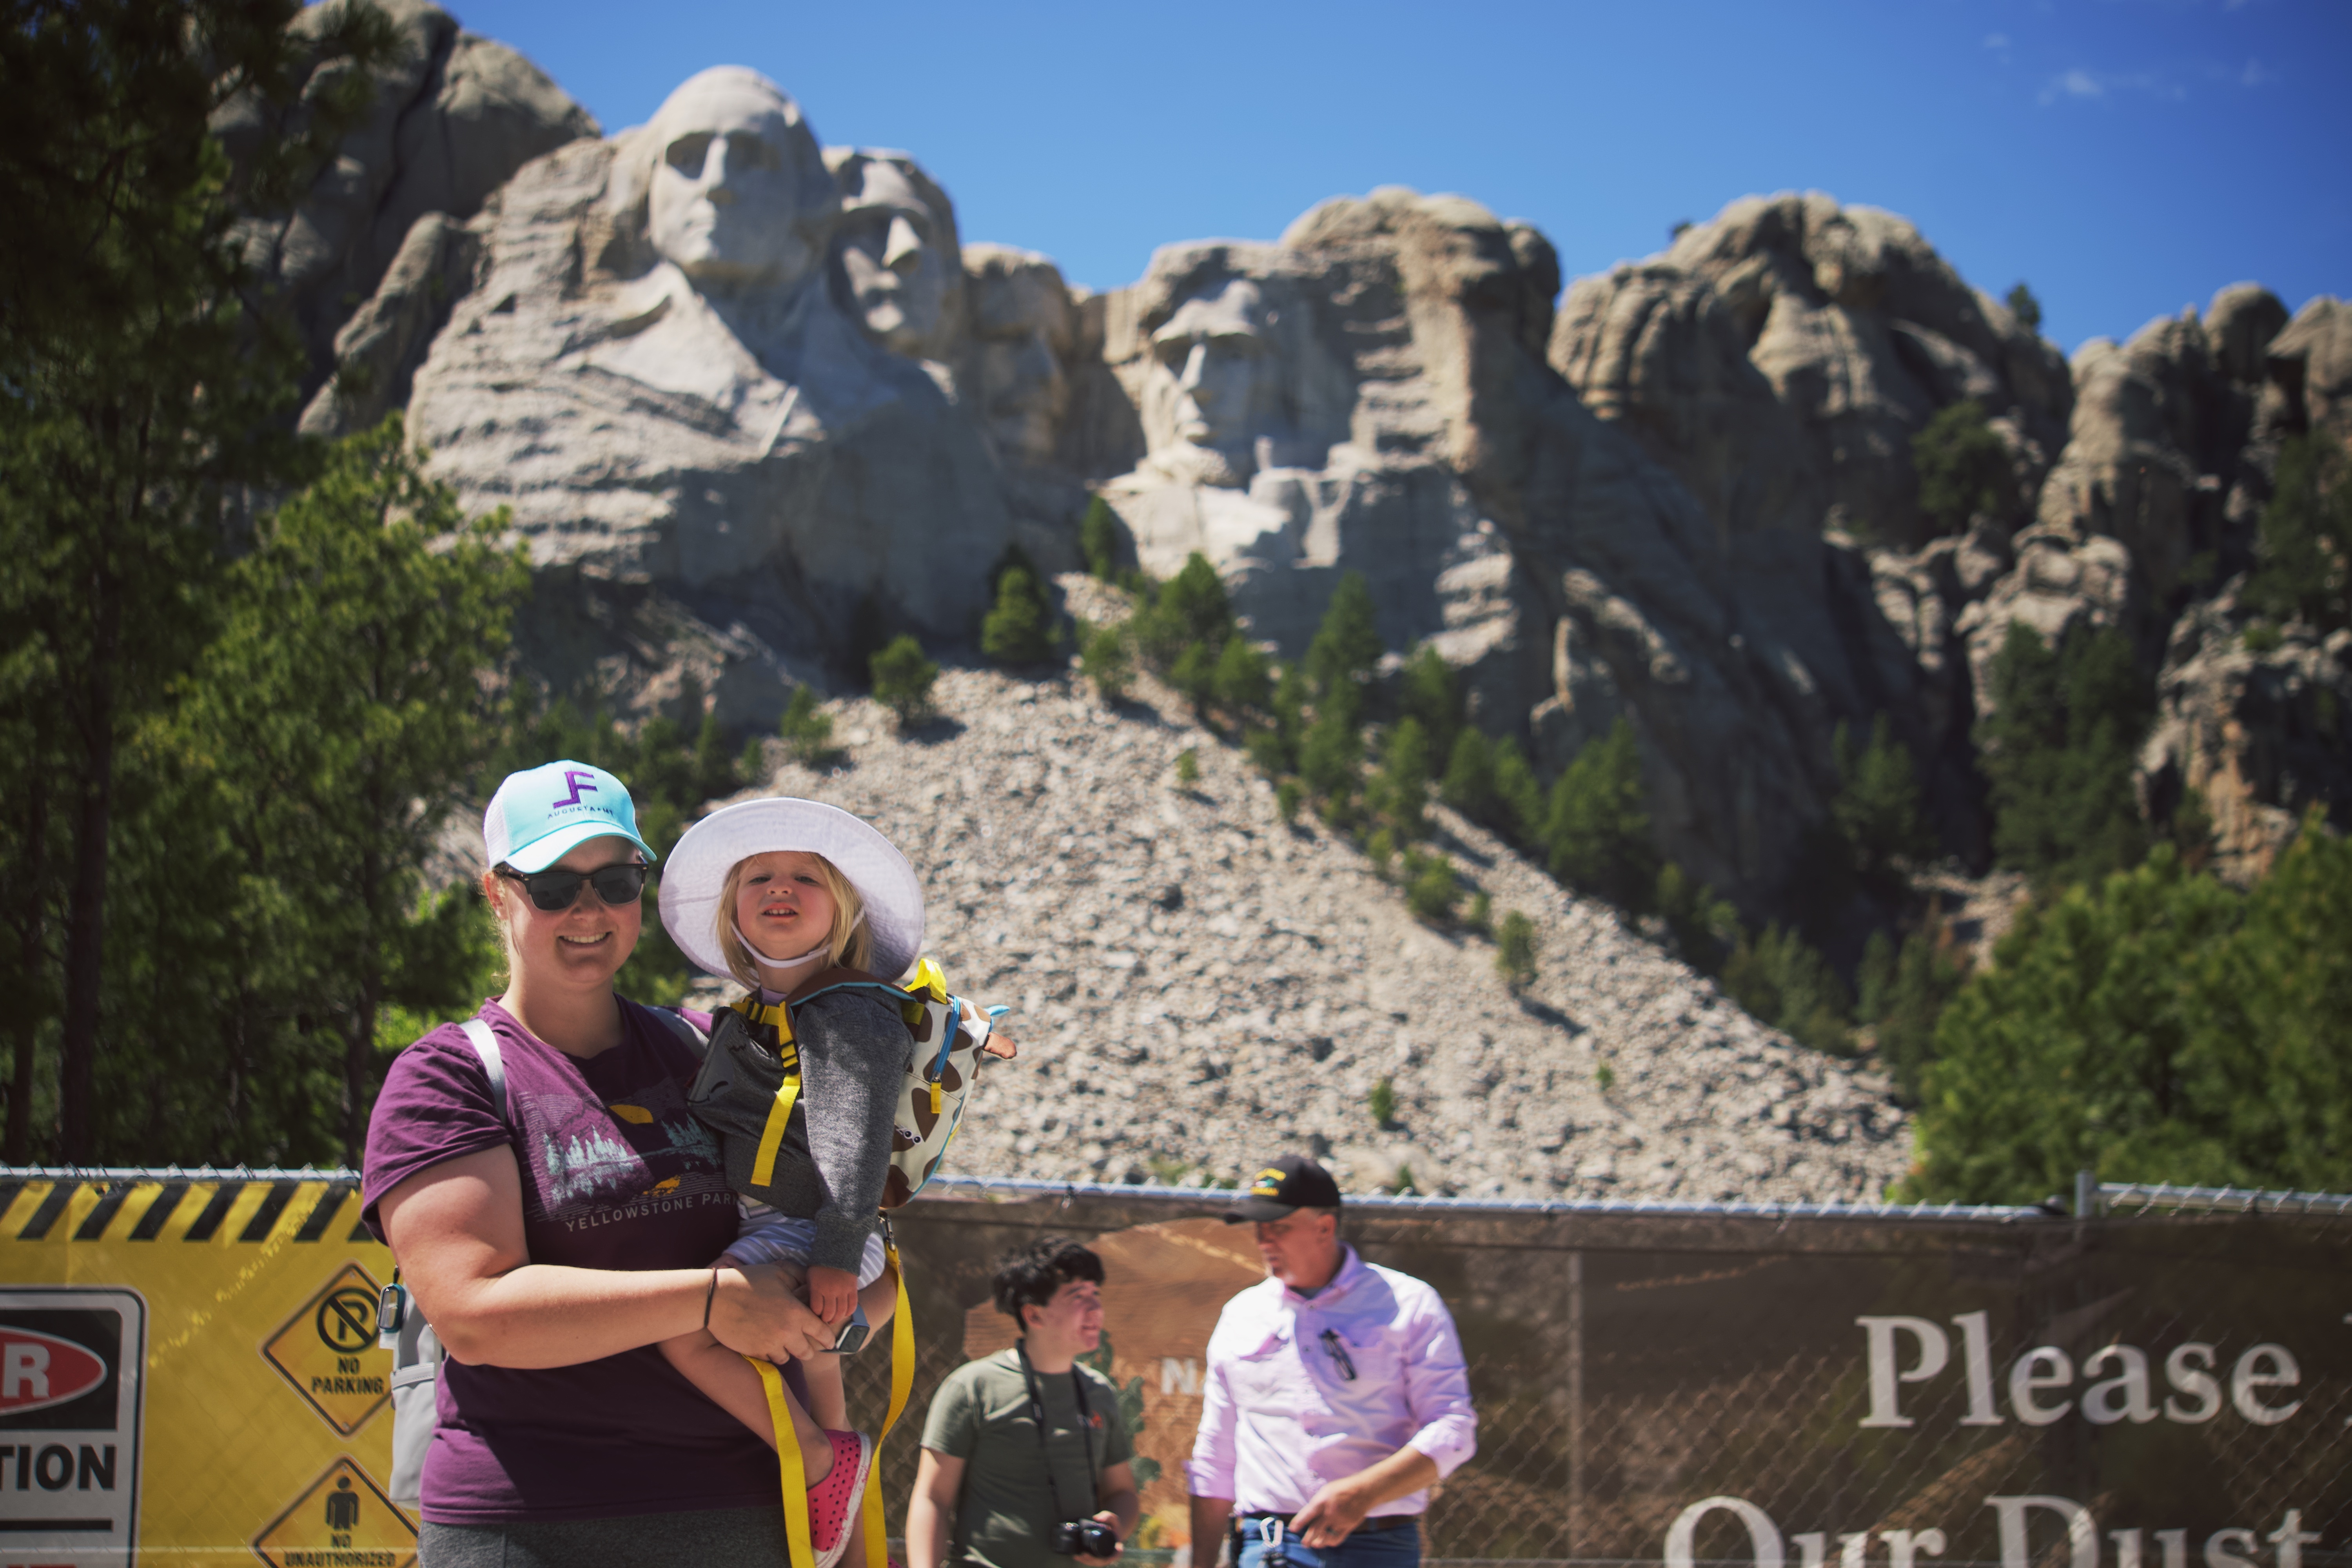 Meagan and Lucy at Mount Rushmore